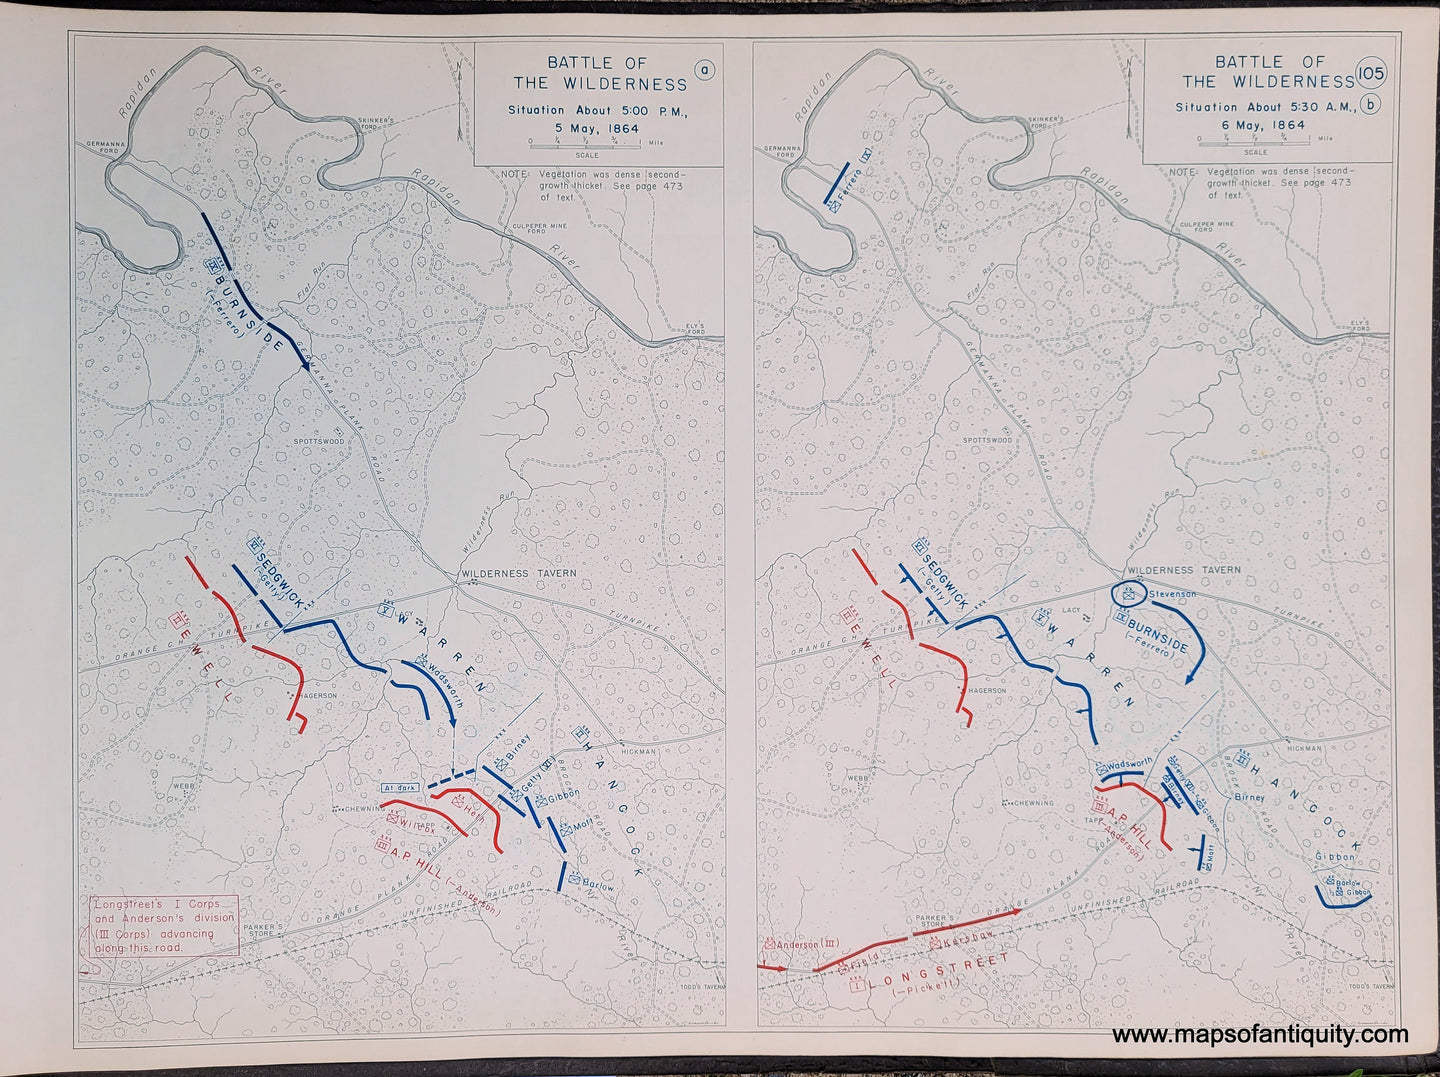 Genuine-Antique-Map-Battle-of-the-Wilderness-Situation-About-5-00-PM-5-May-1864-and-Situation-About-5-30-AM-6-May-1864-1948-Matthew-Forney-Steele-Dept-of-Military-Art-and-Engineering-US-Military-Academy-West-Point-Maps-Of-Antiquity